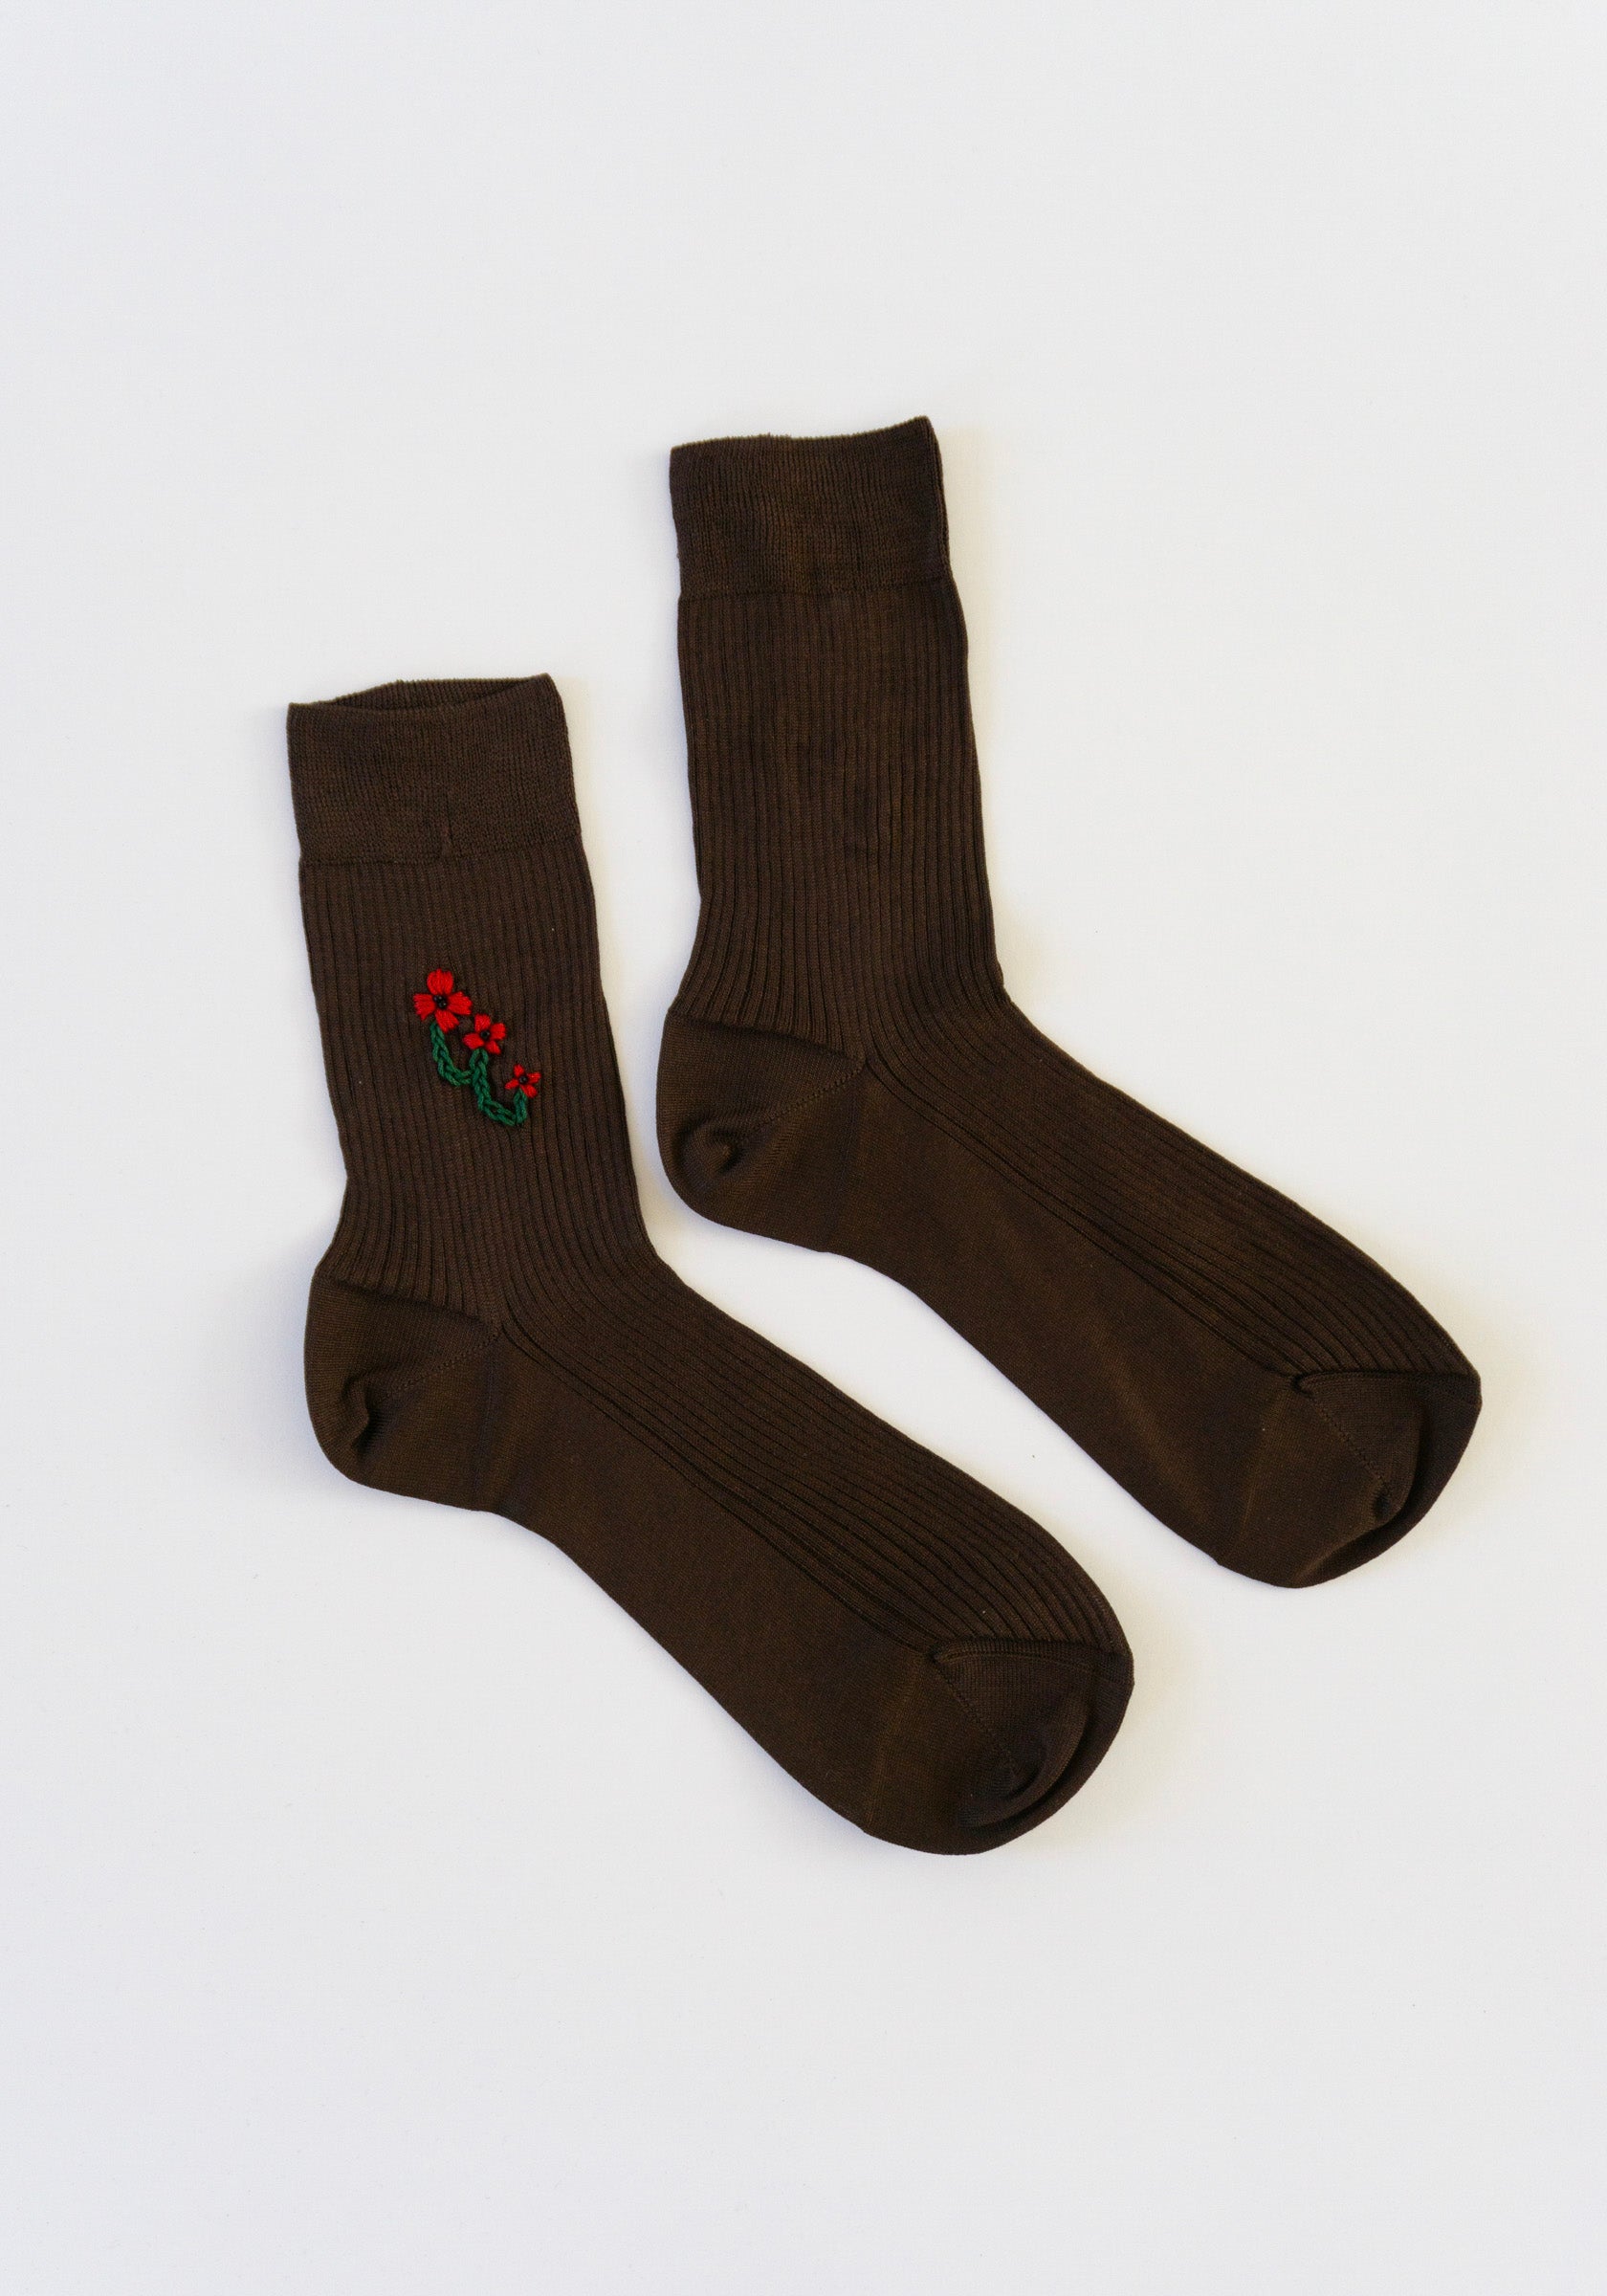 Floral Embroidered Sock with Brown Poppy